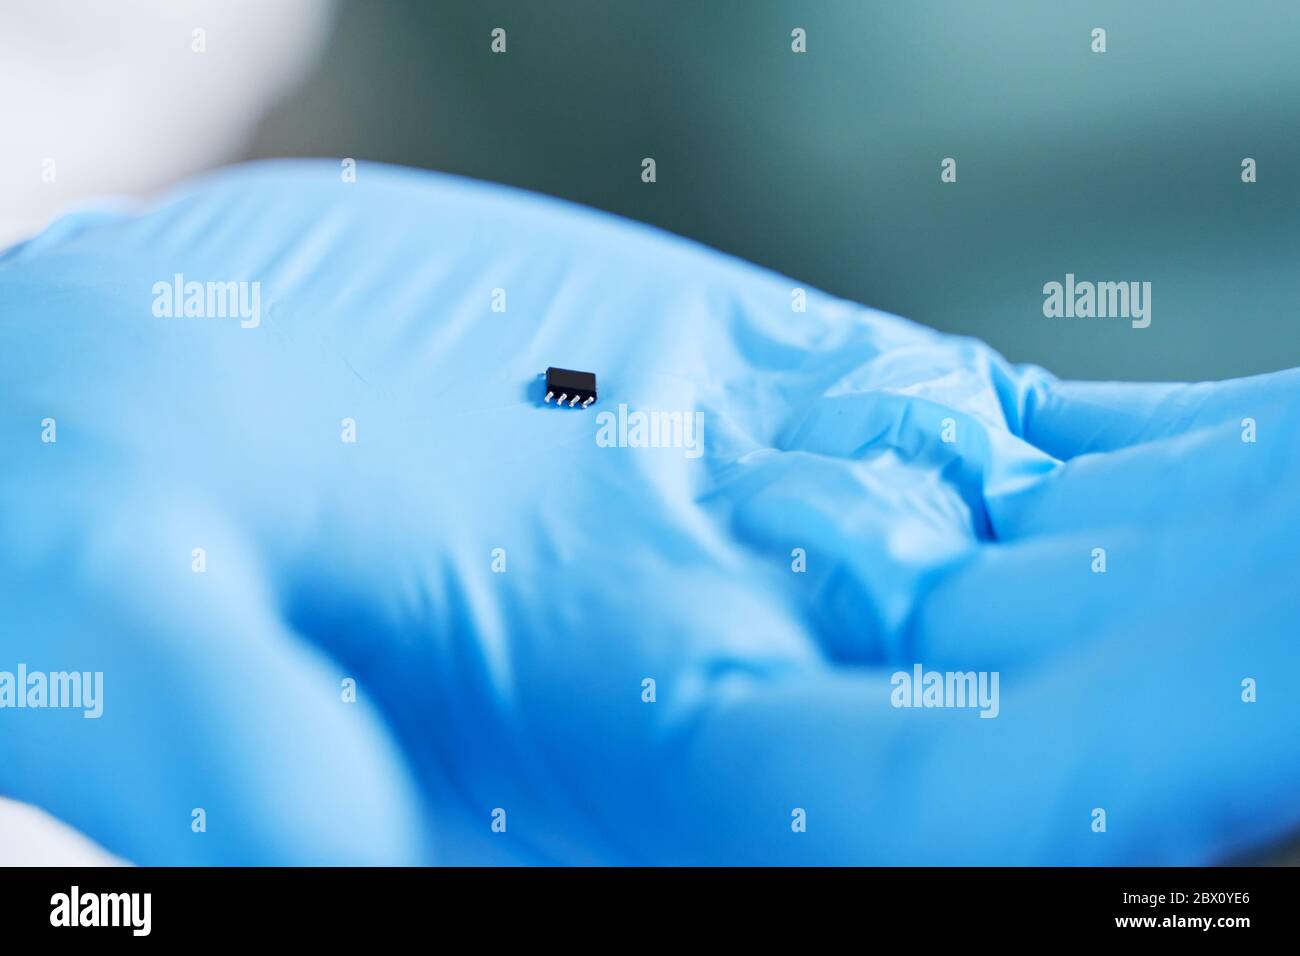 Hand holds chip compenent. Embedding the chip under human skin, microcontroller implanting NFC technology Stock Photo